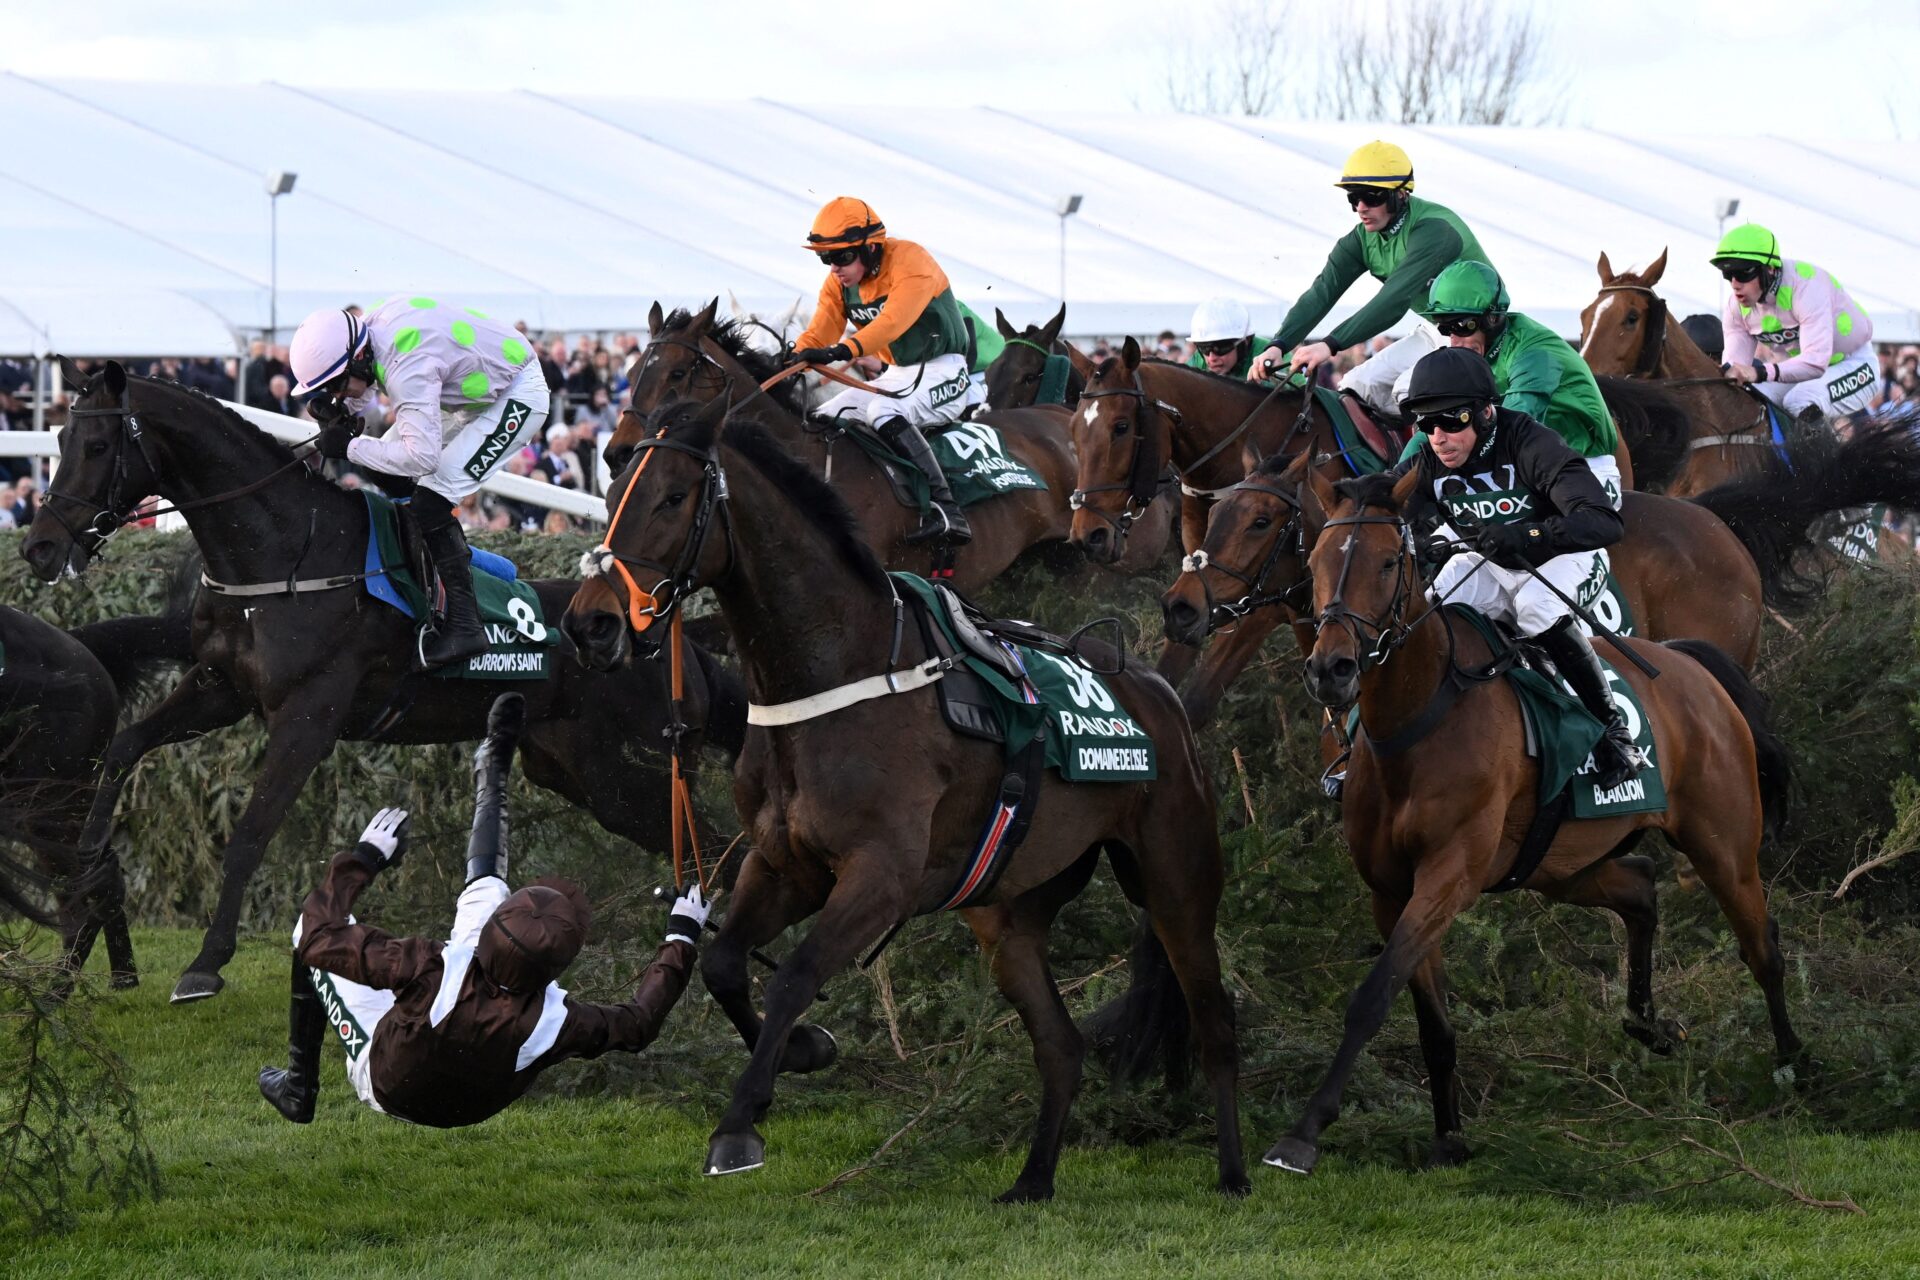 Grand National guide